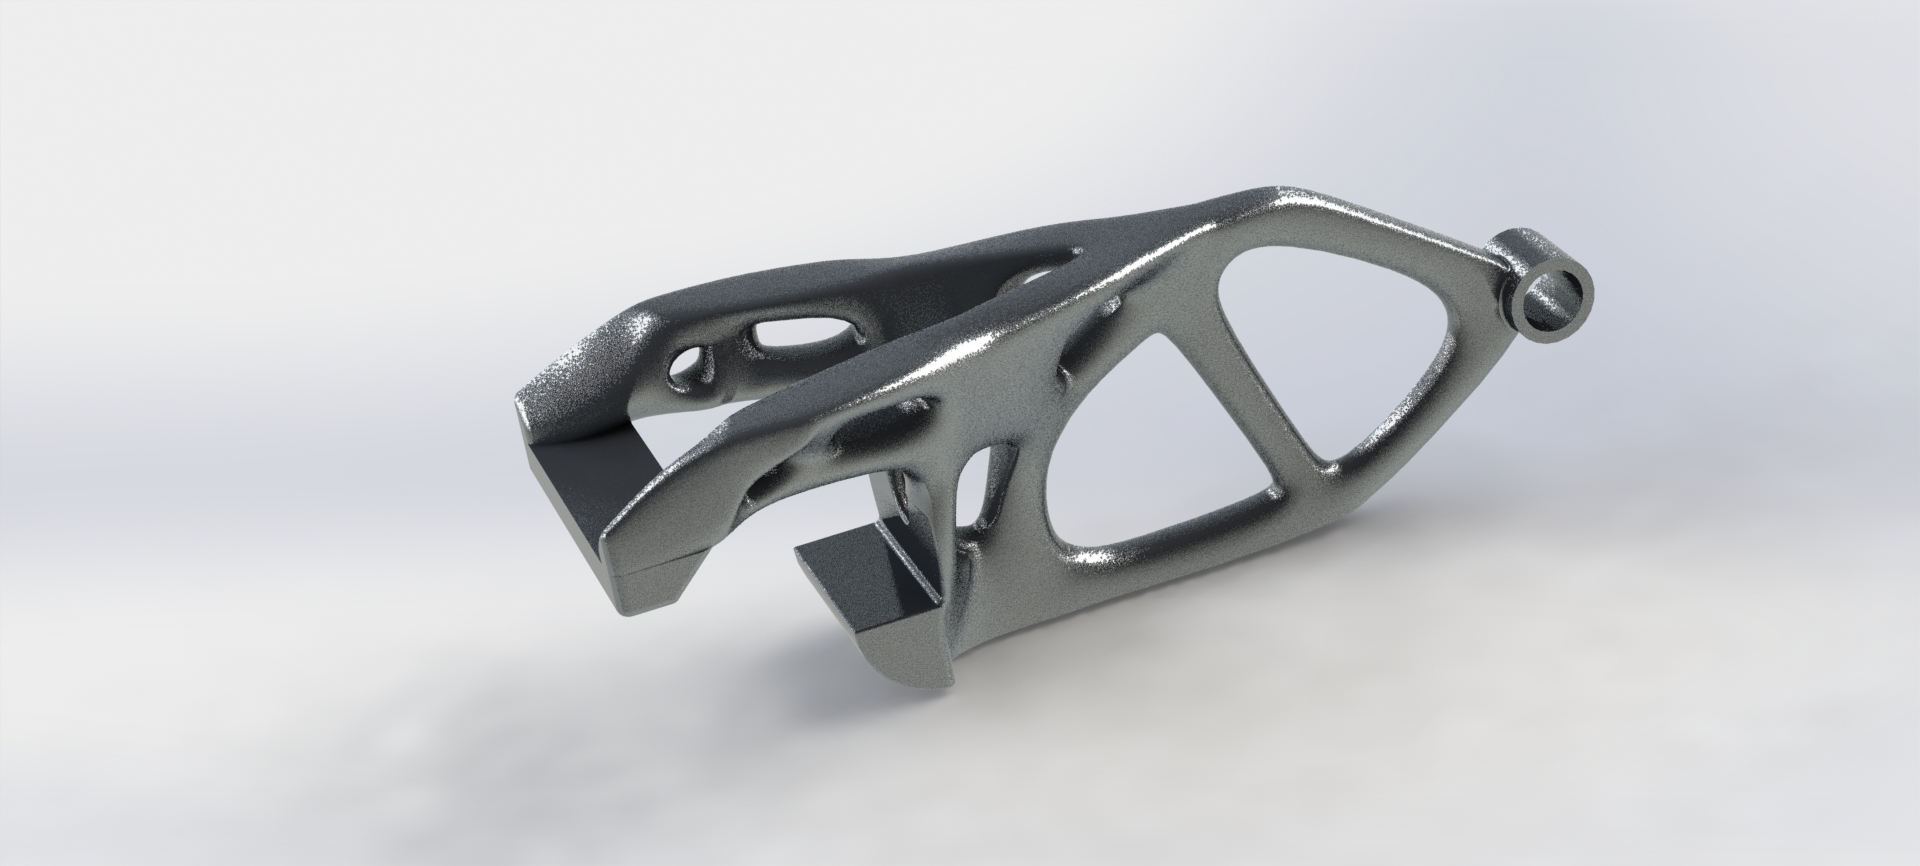 Topology optimized bottle opener, the goal of the optimization was to minimize mass while still preserving a certain factor of safety, in this case the factor of safety is 1.8. Made from aluminium.